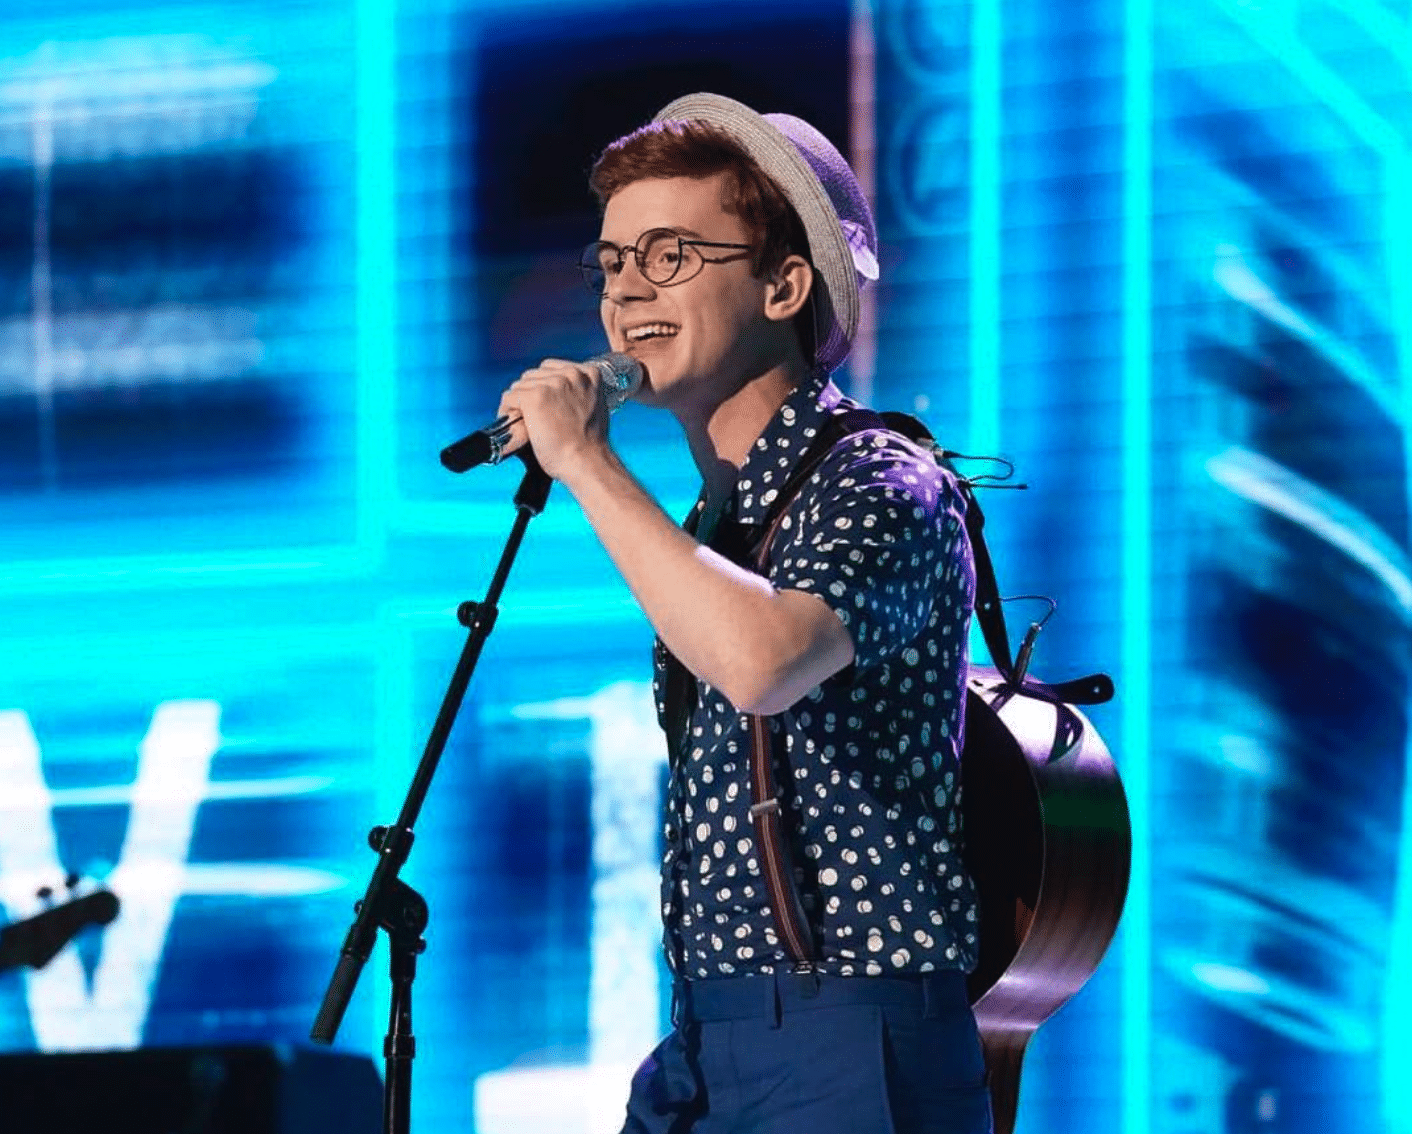 Walker Burroughs sang the Jonas Brothers' "Lovebug" for the crowd after he made Top 10 on American Idol Monday, April 15. (Photo Walker Burroughs Instagram)